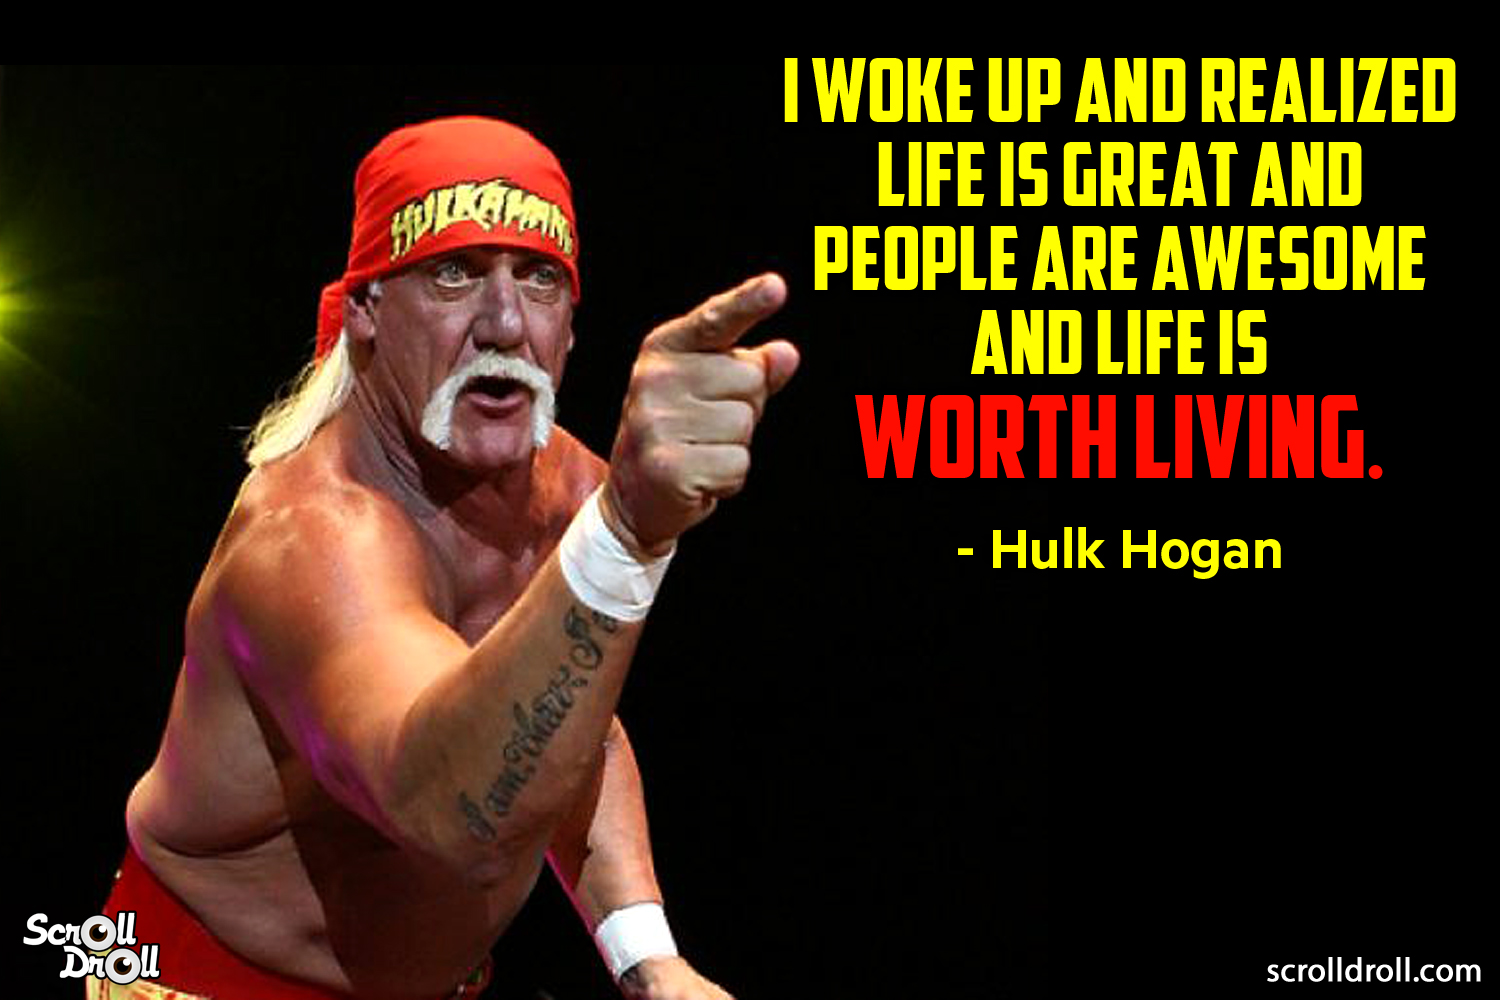 13 Inspiring Quotes by WWE Wrestlers